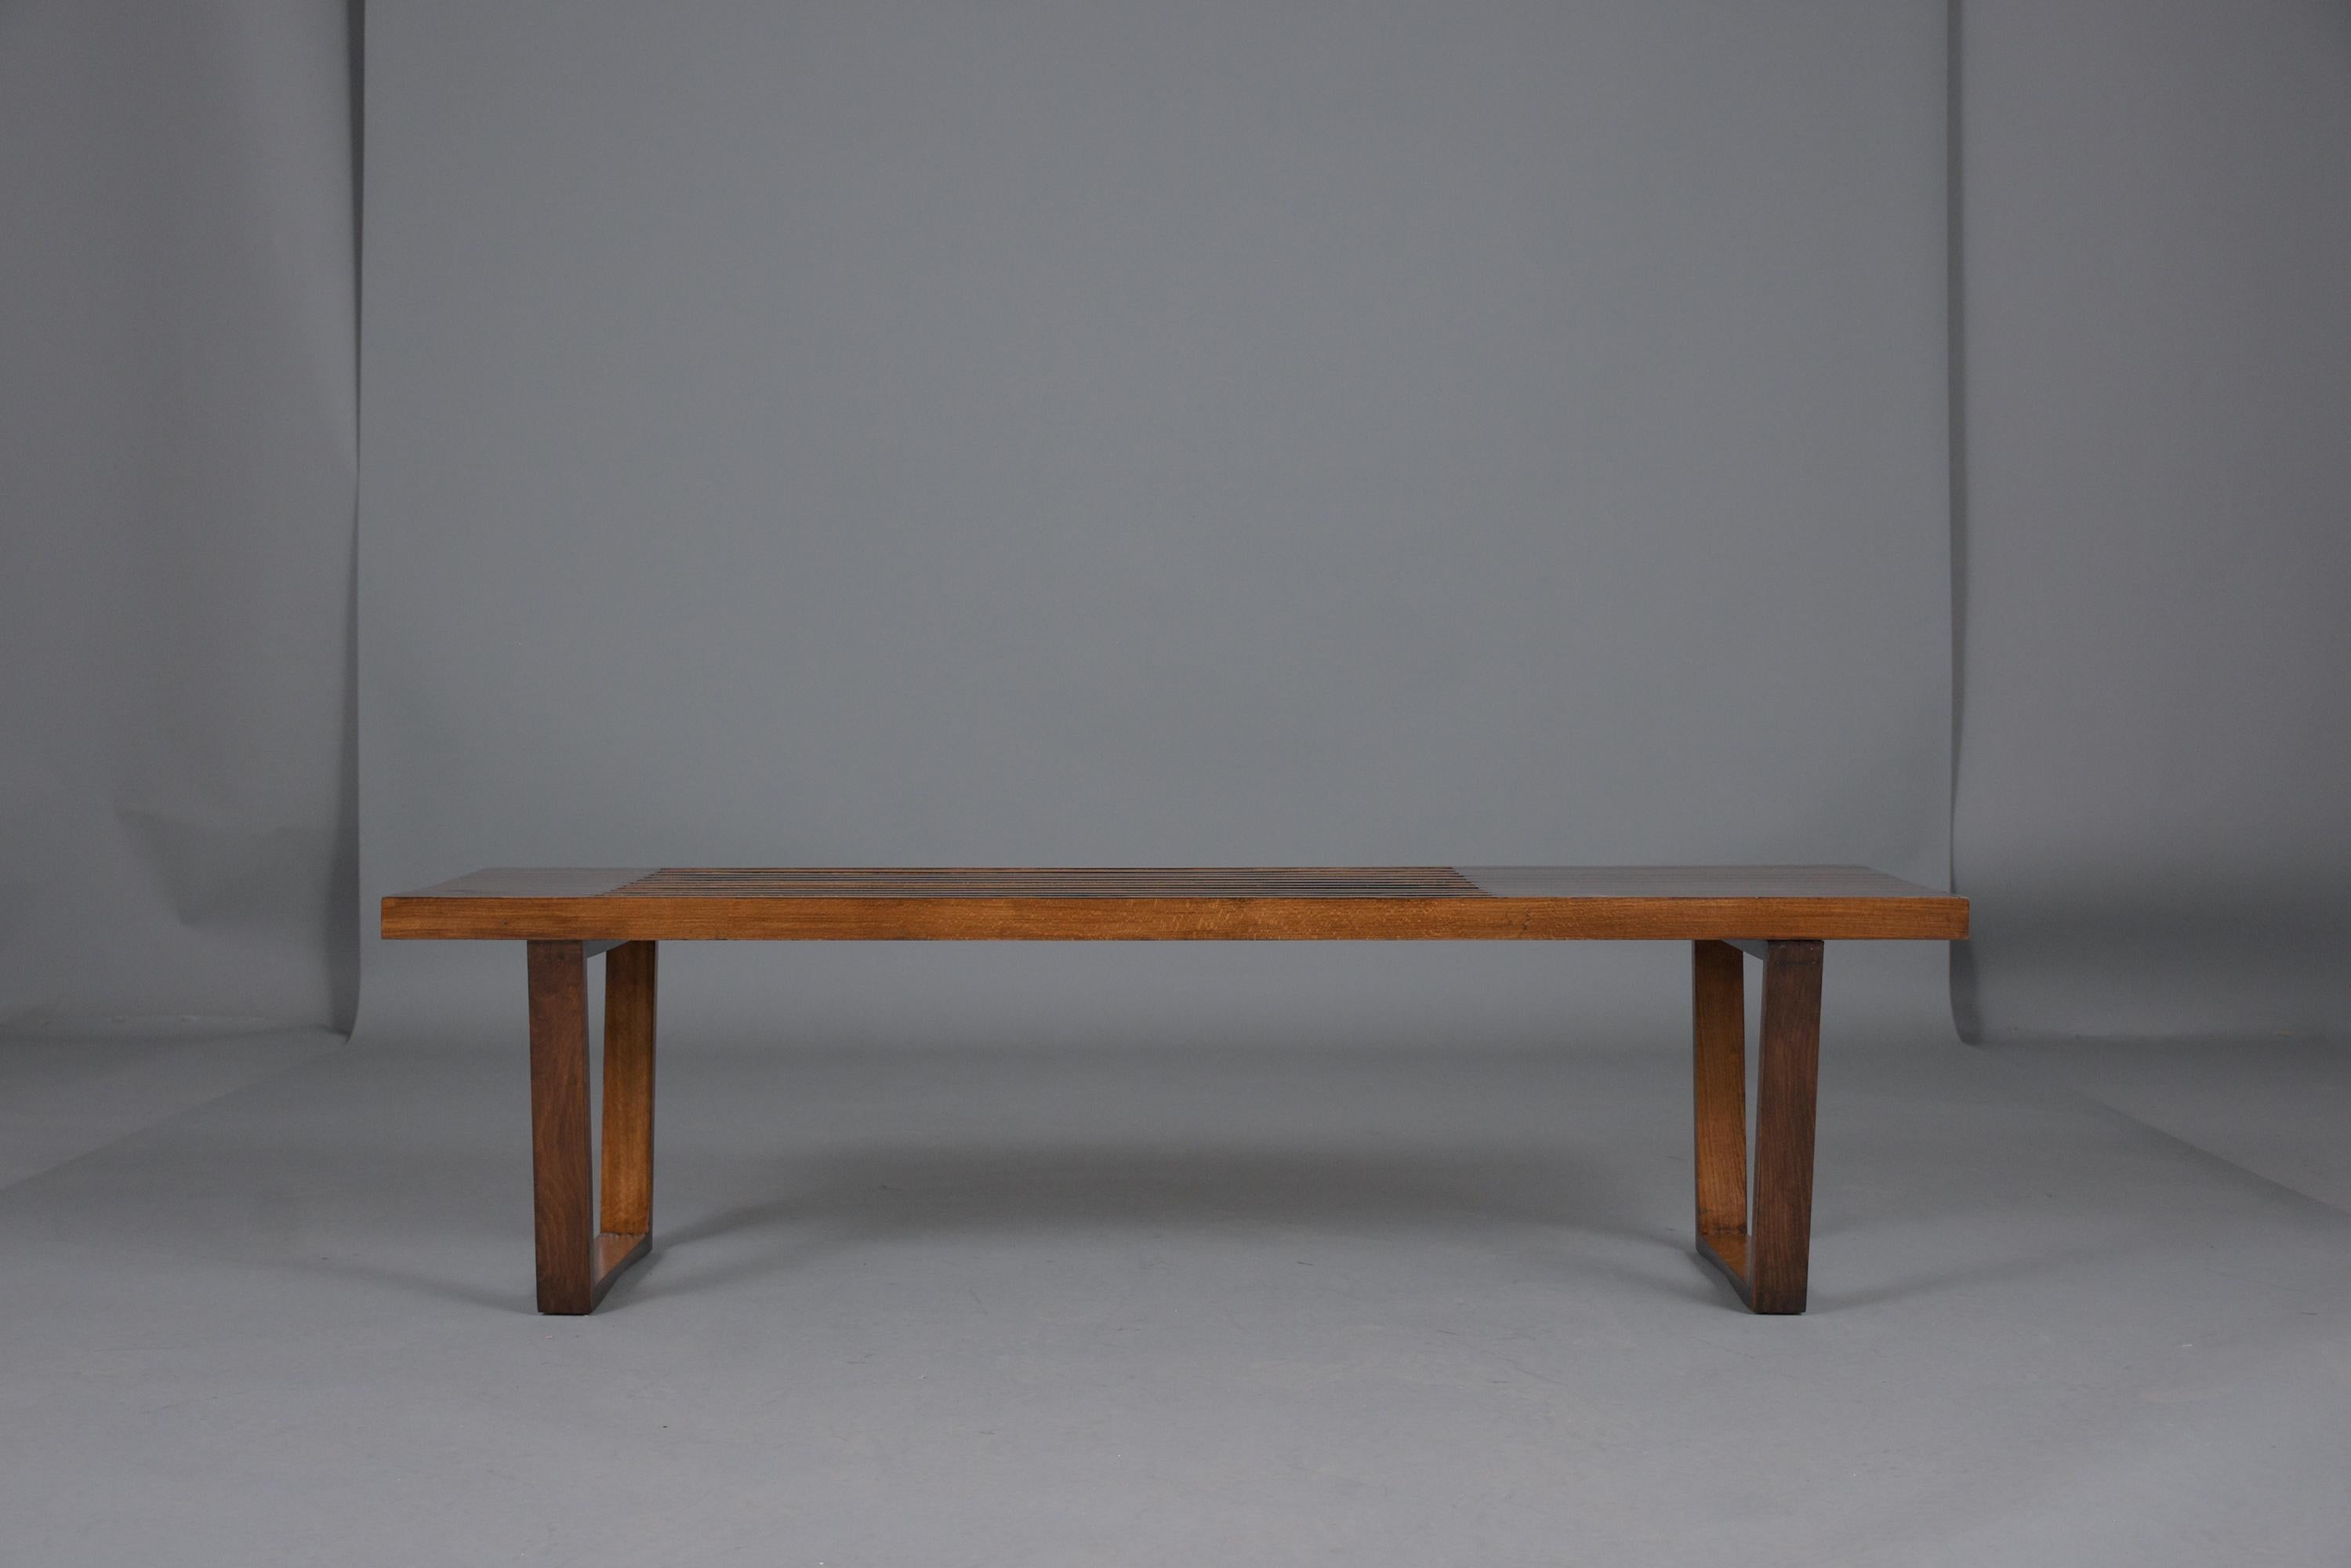 This sleek mid-century modern slatted bench in the style of George Miller is handcrafted out of beechwood and has been professionally restored by our team of craftsmen. The bench is newly finished in medium and dark walnut color with a beautiful